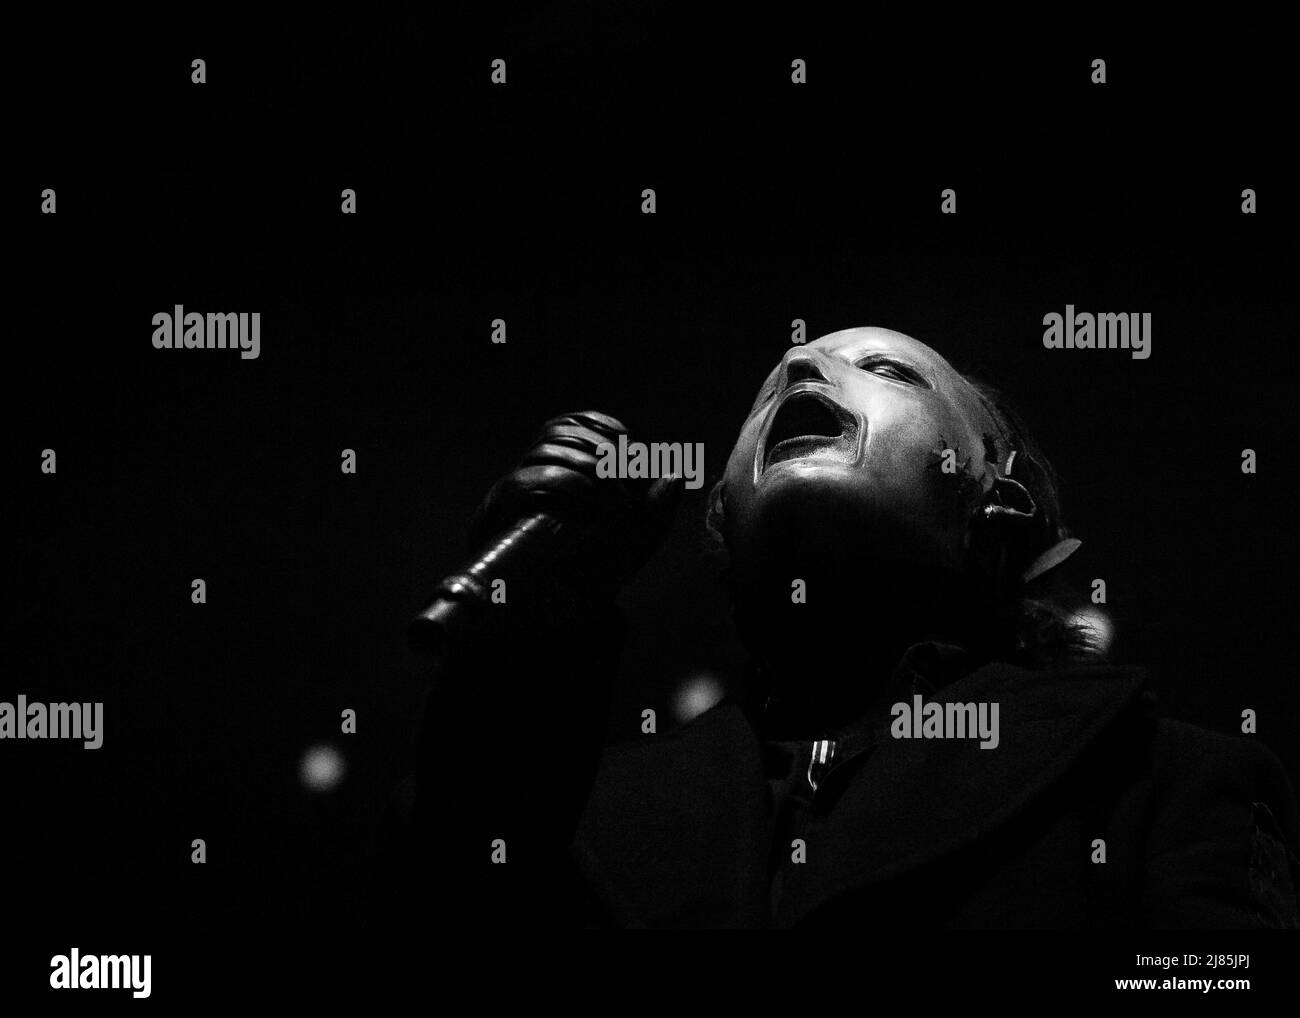 Slipknot frontman Corey Taylor performing live on stage in Oslo, Norway Stock Photo